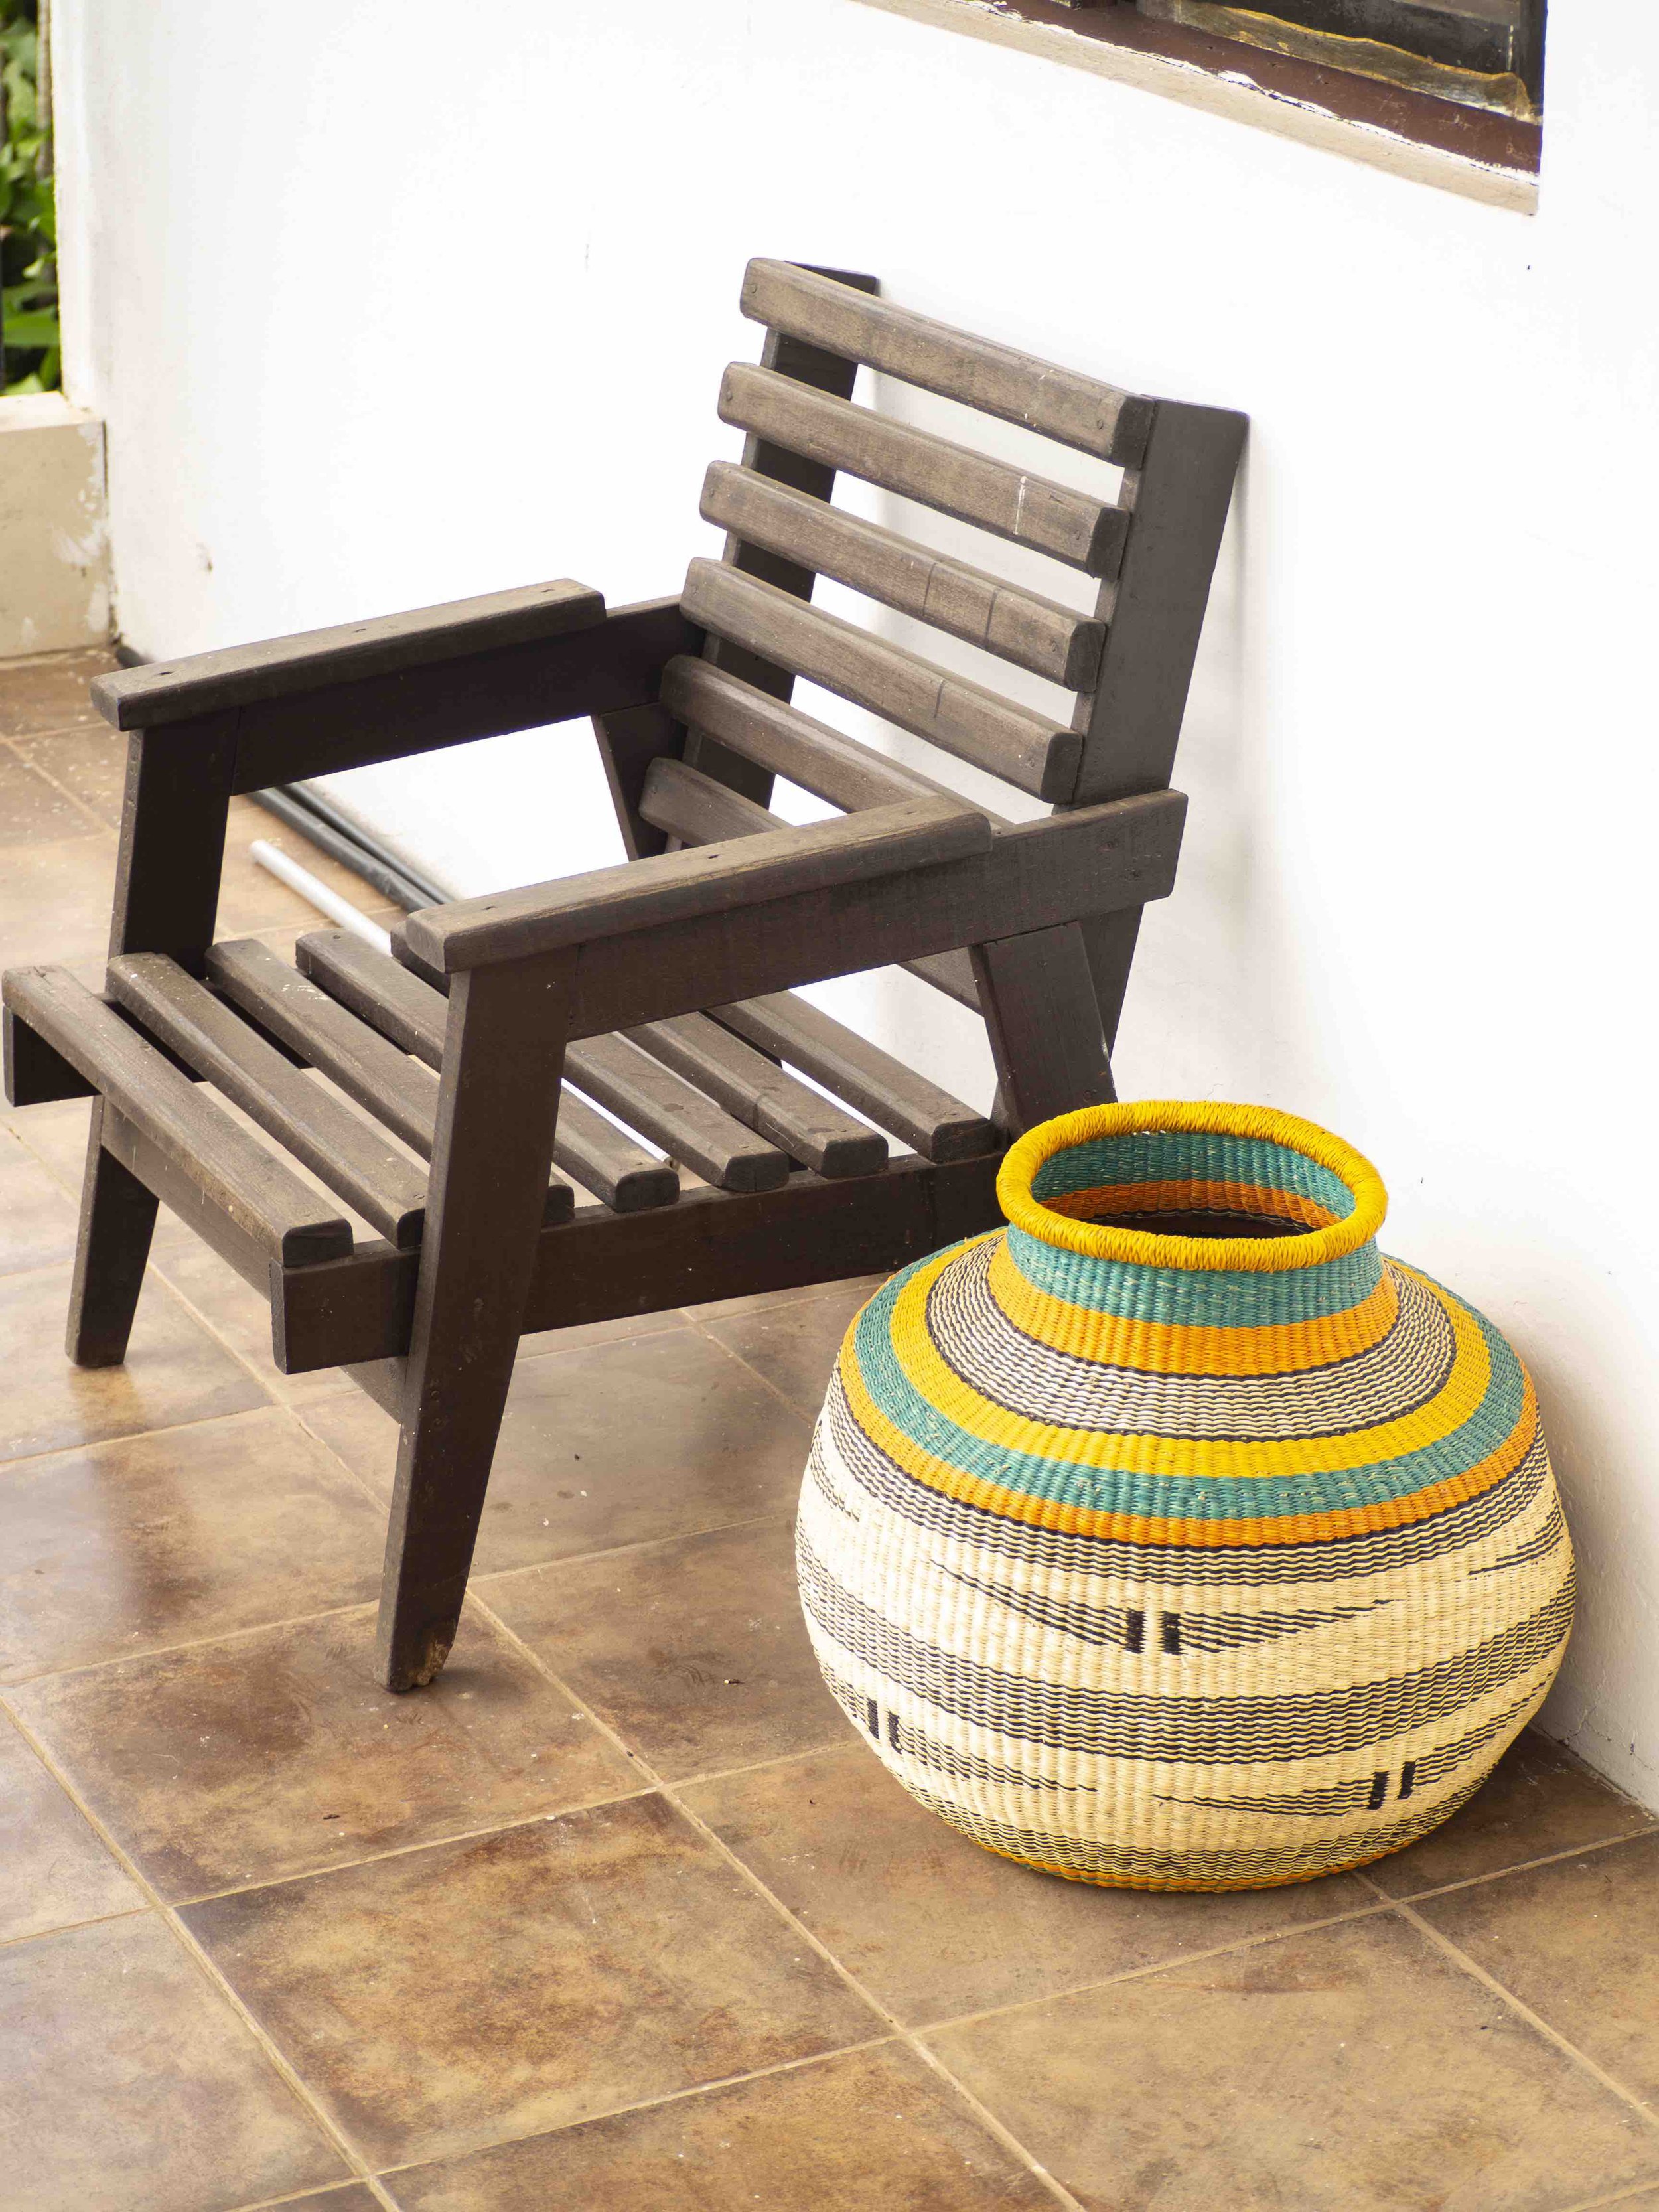 BOLGA WOVEN BASKET HOME DECOR STORAGE SOLUTIONS MADE IN AFRICA6.jpg